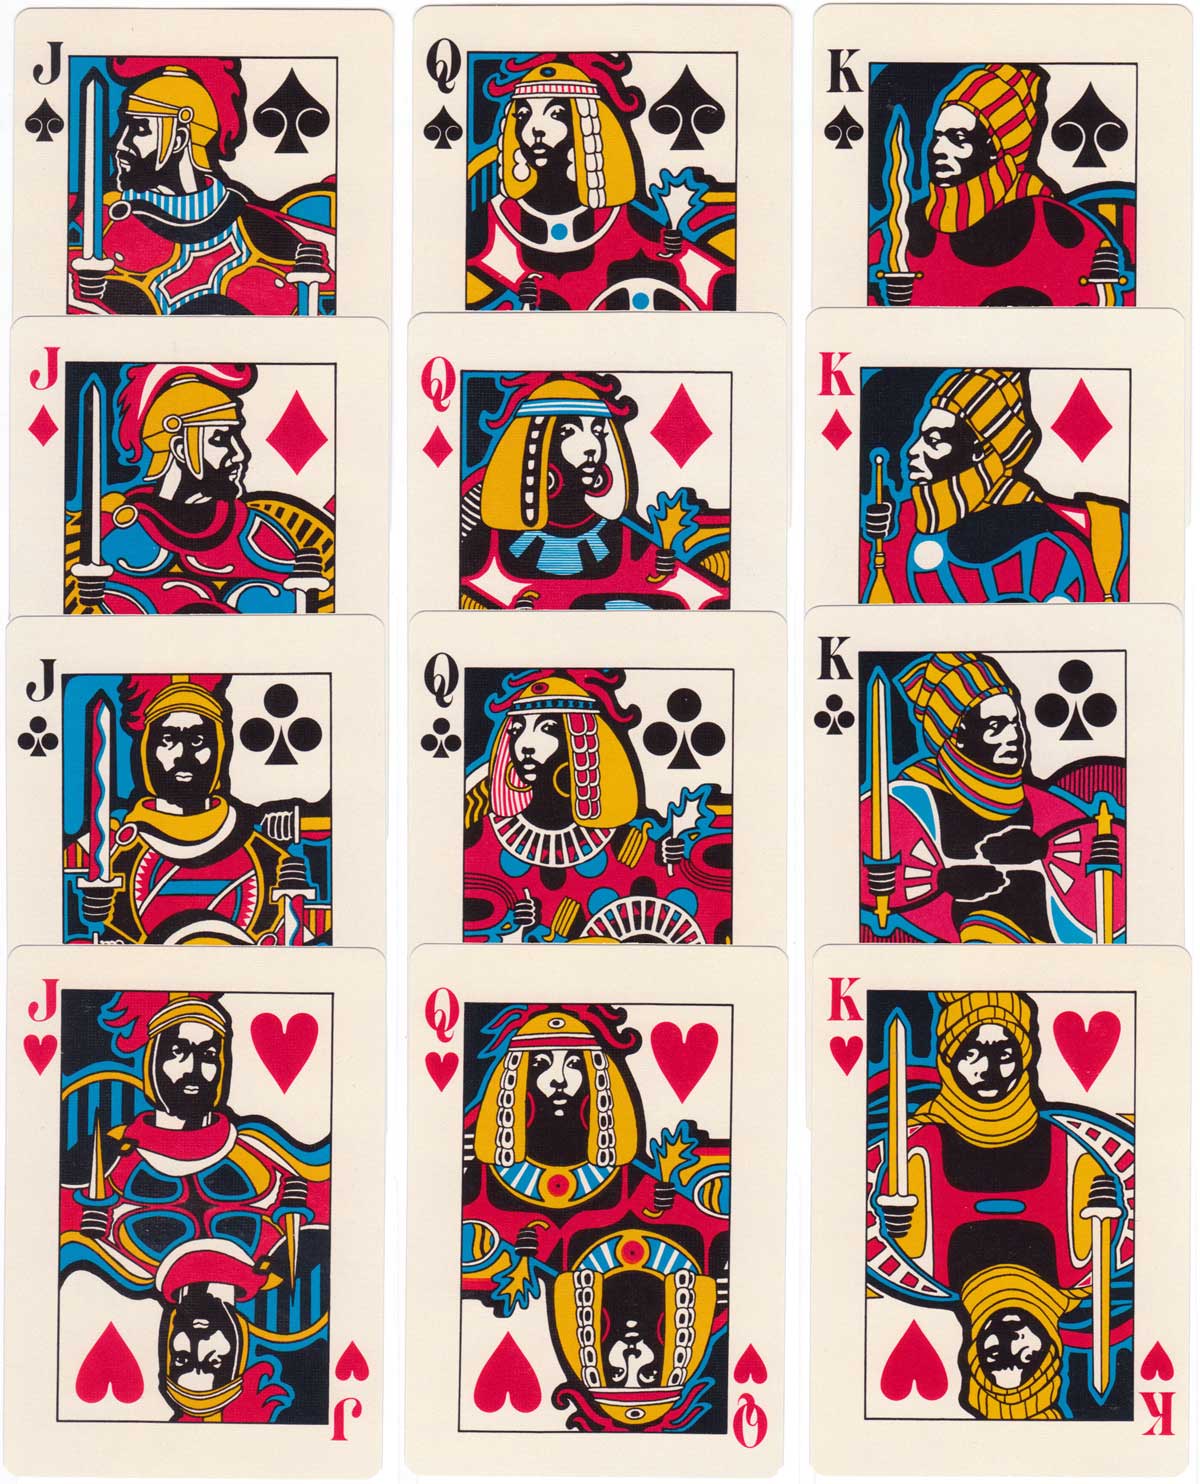 Sheba playing cards published by Omega Concepts Ltd, 1972